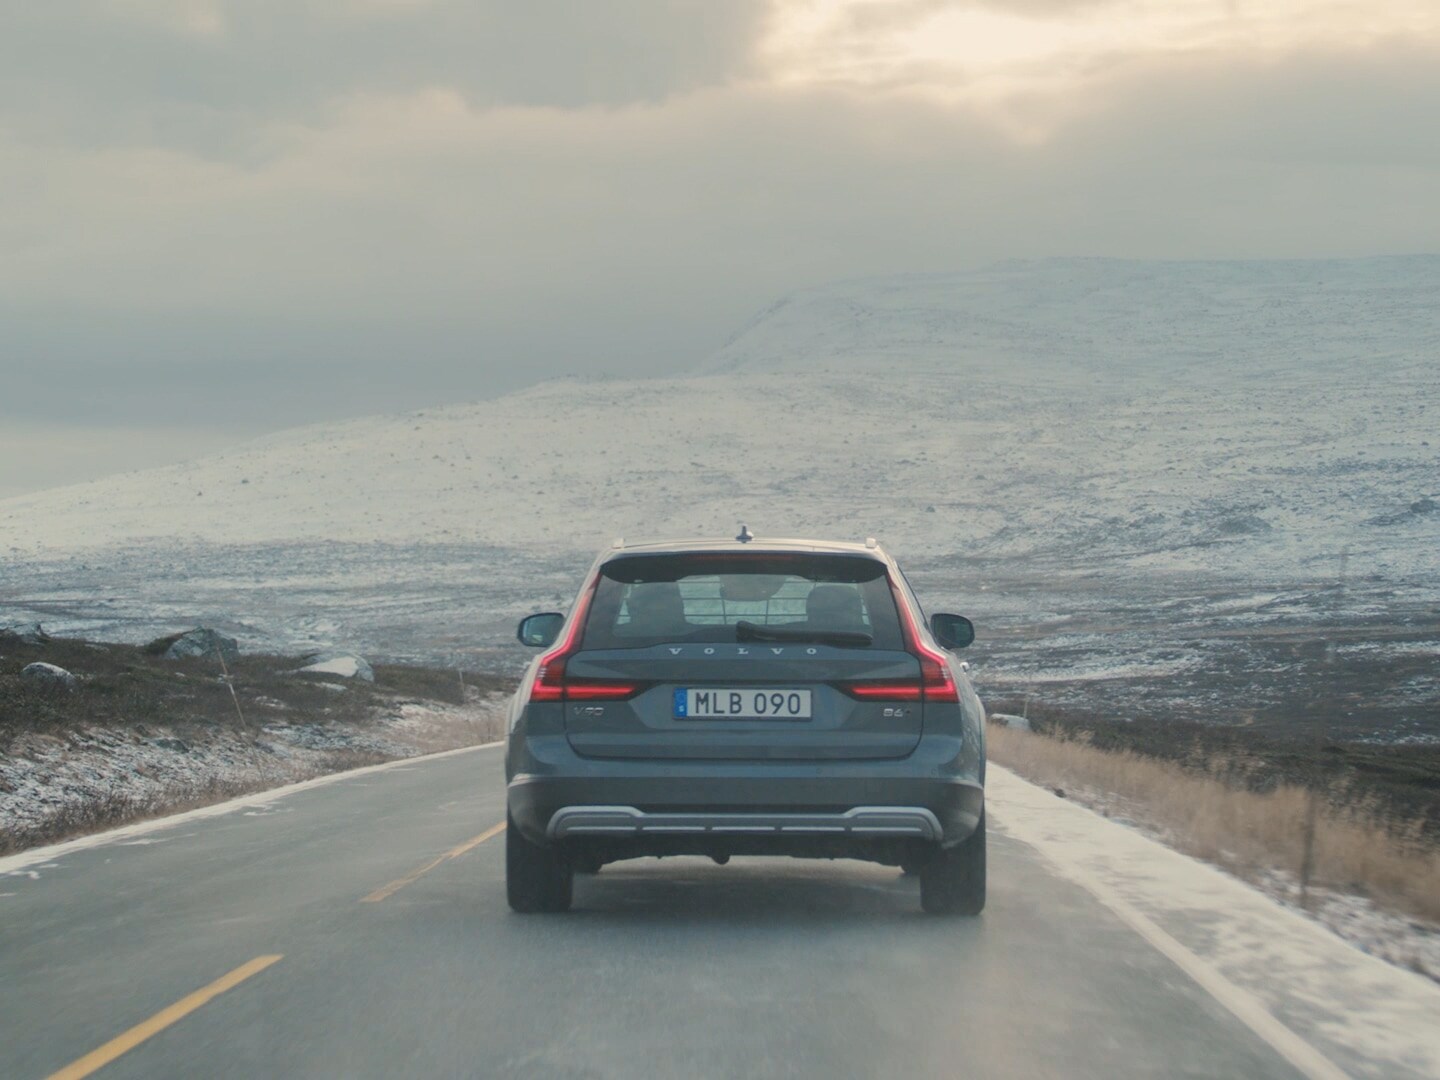 A grey V90 Cross Country on the road